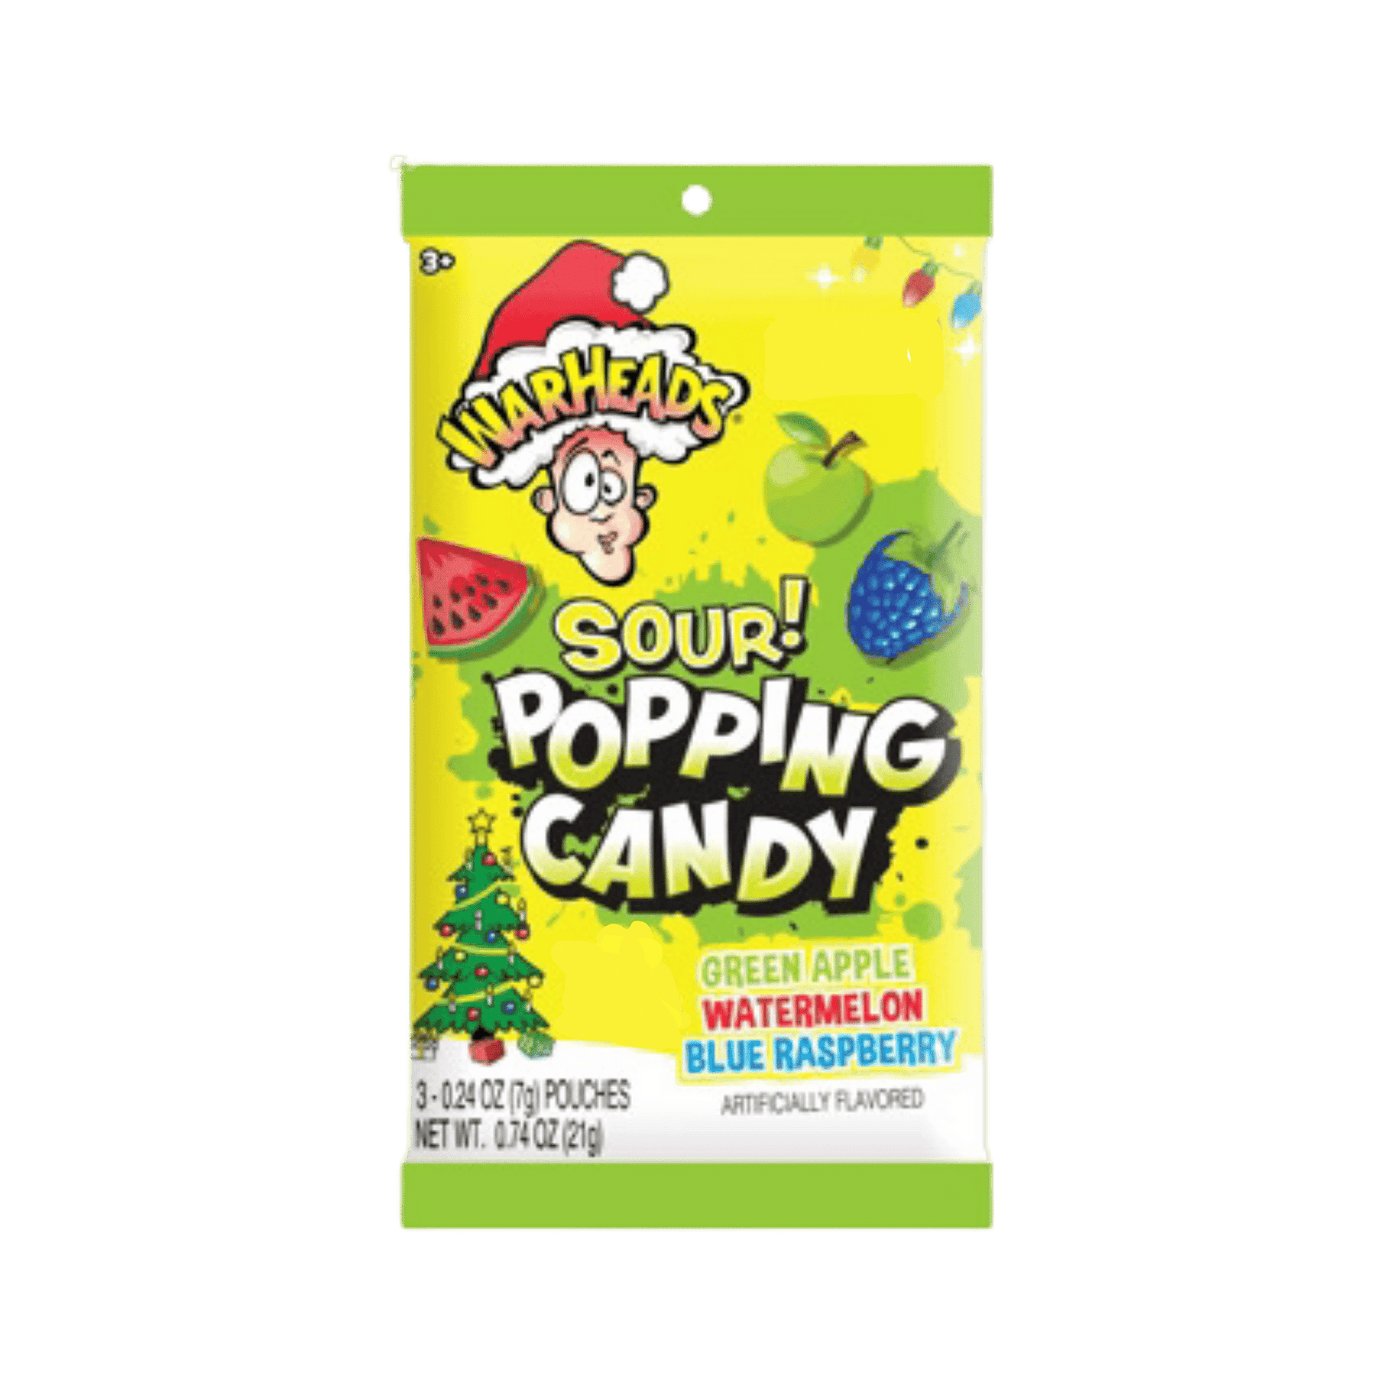 Warheads Popping Candy (Pack of 3)